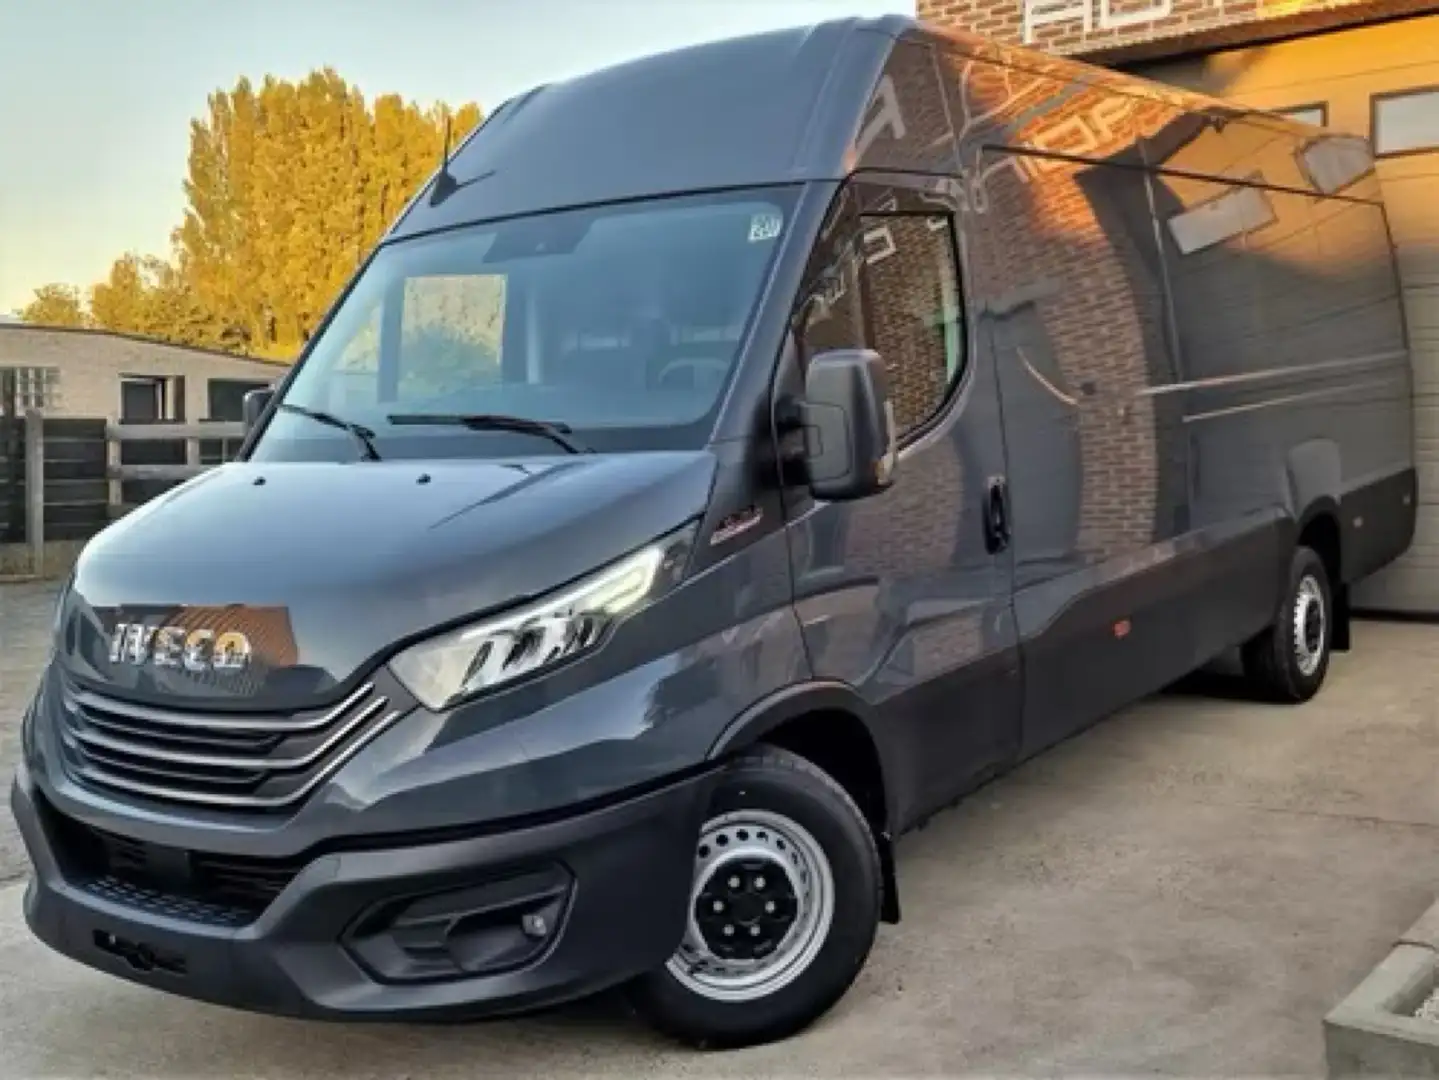 Iveco Daily L4 H3, tractable 3,5T, int caisse bois, camera siva - 2